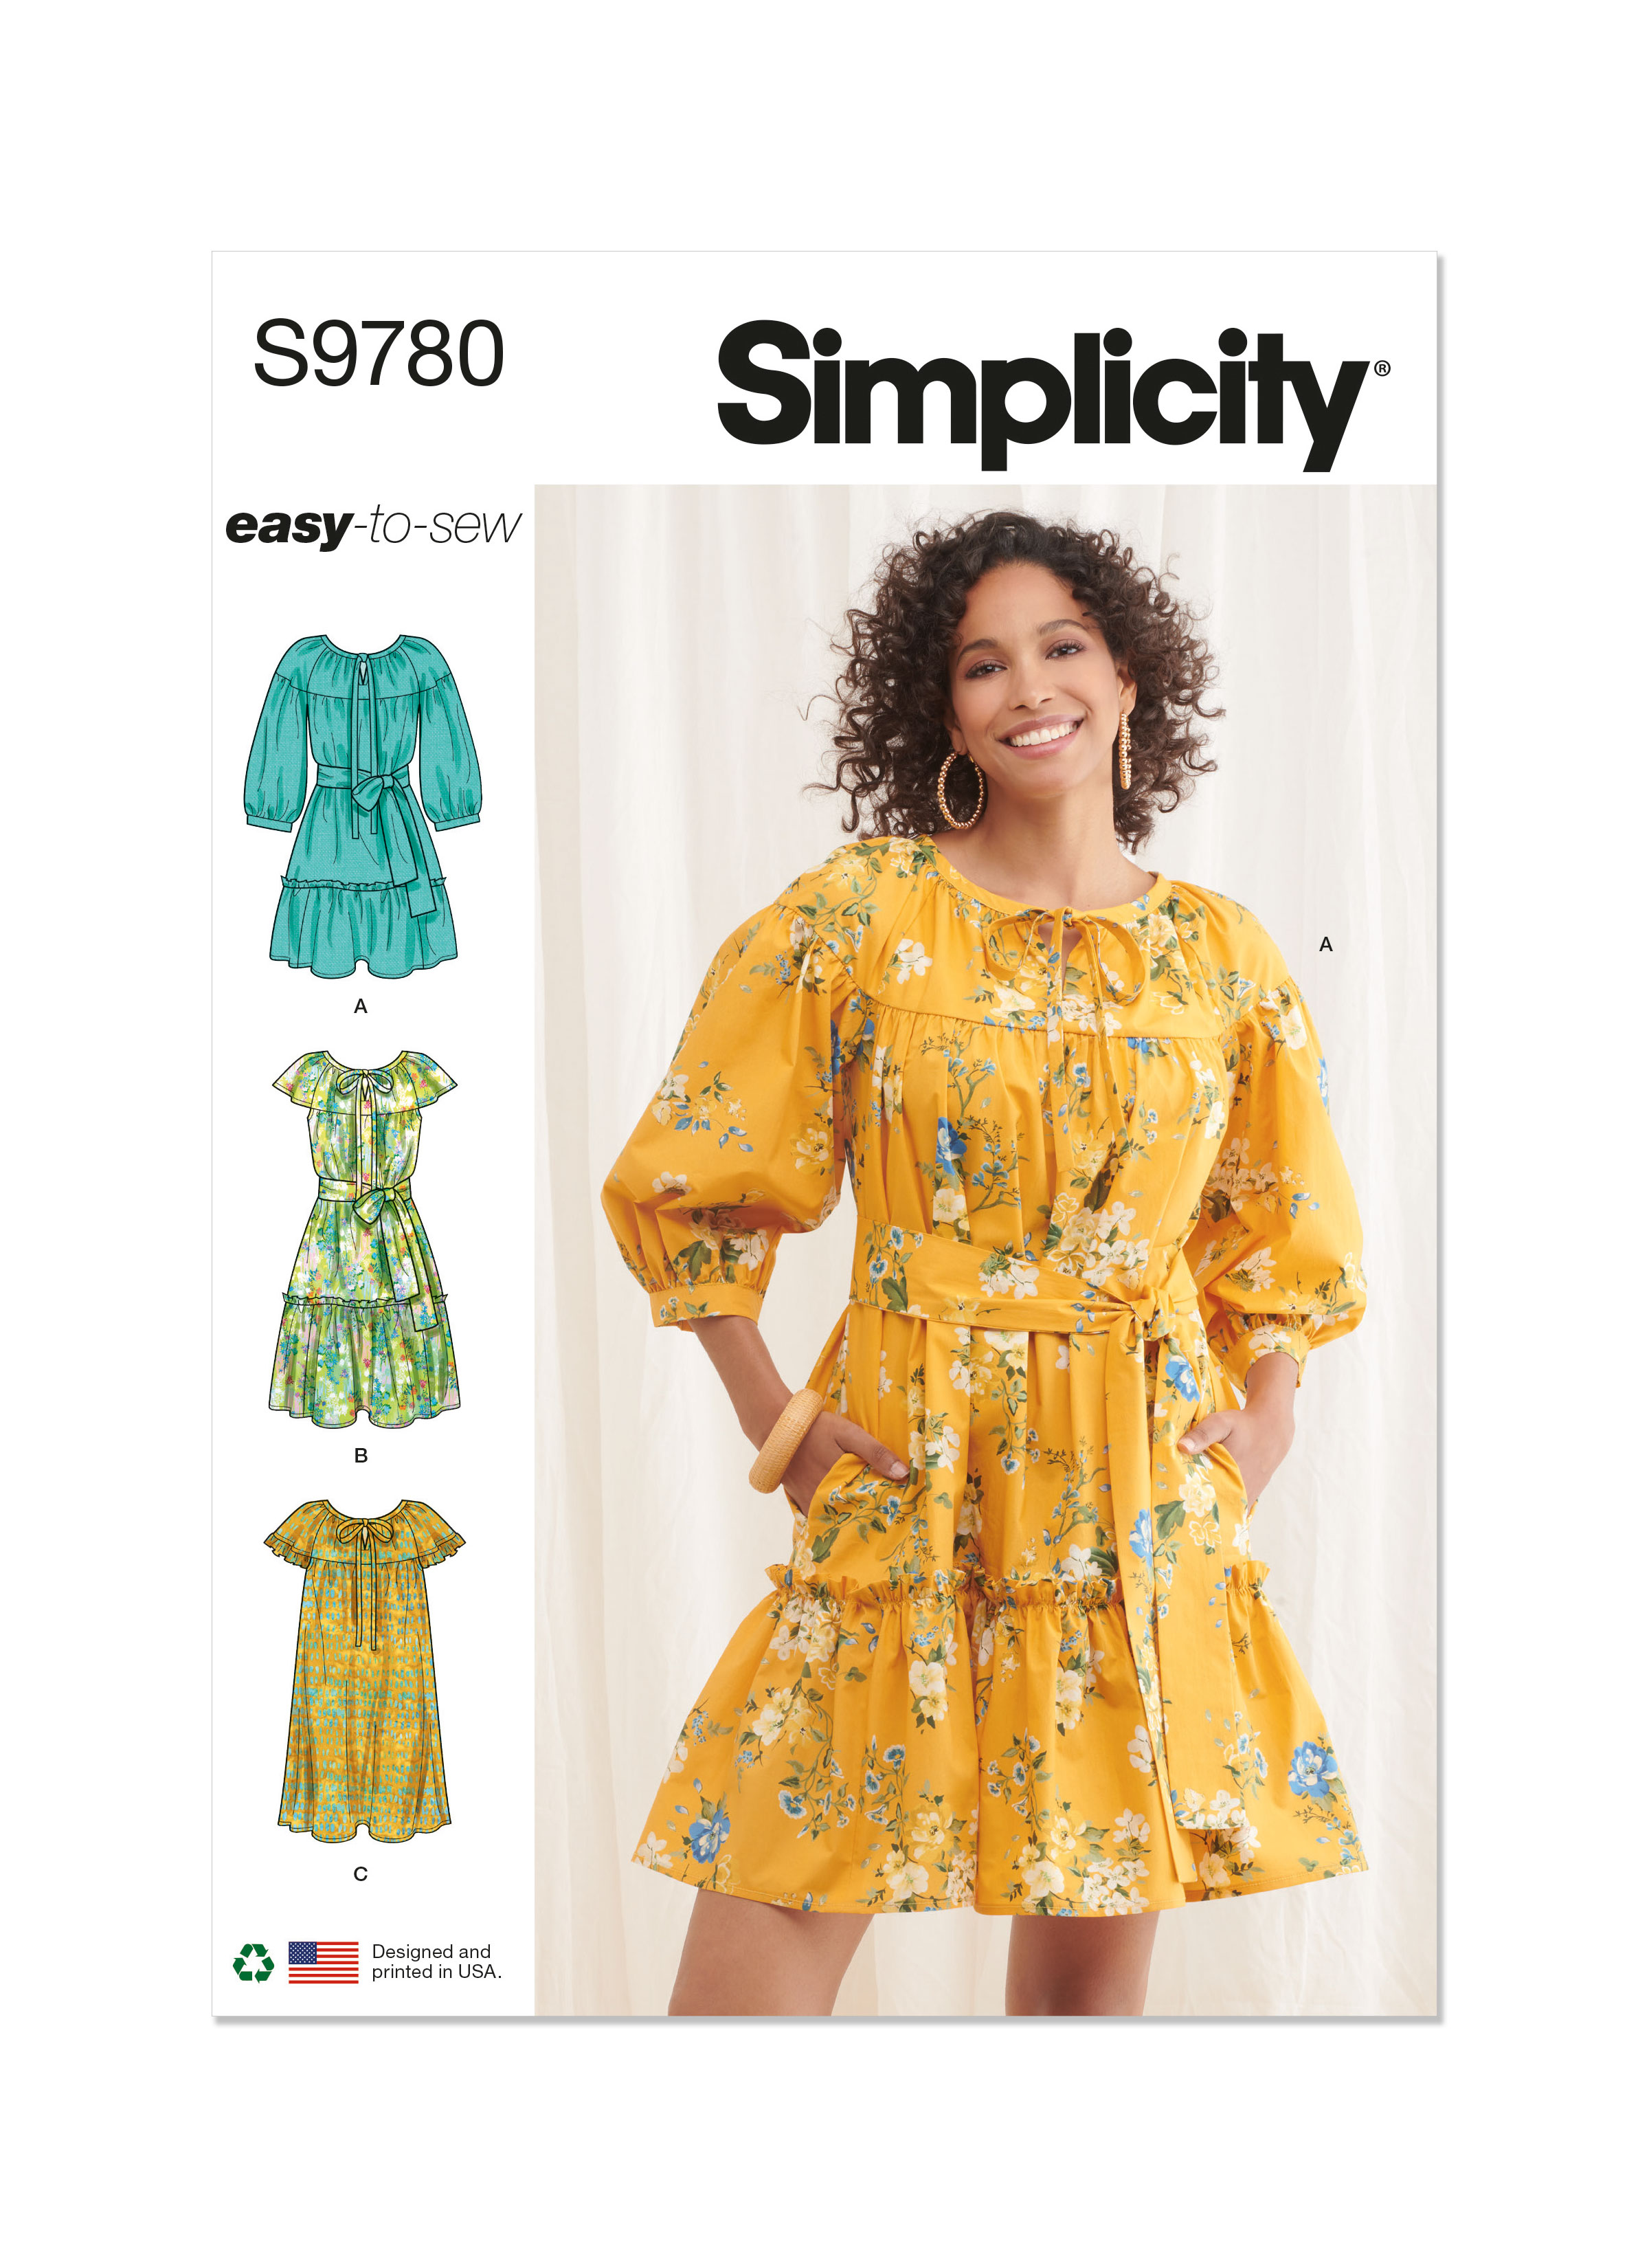 https://images.patternreview.com/sewing/patterns/simplicity/2023/9780/9780.jpg